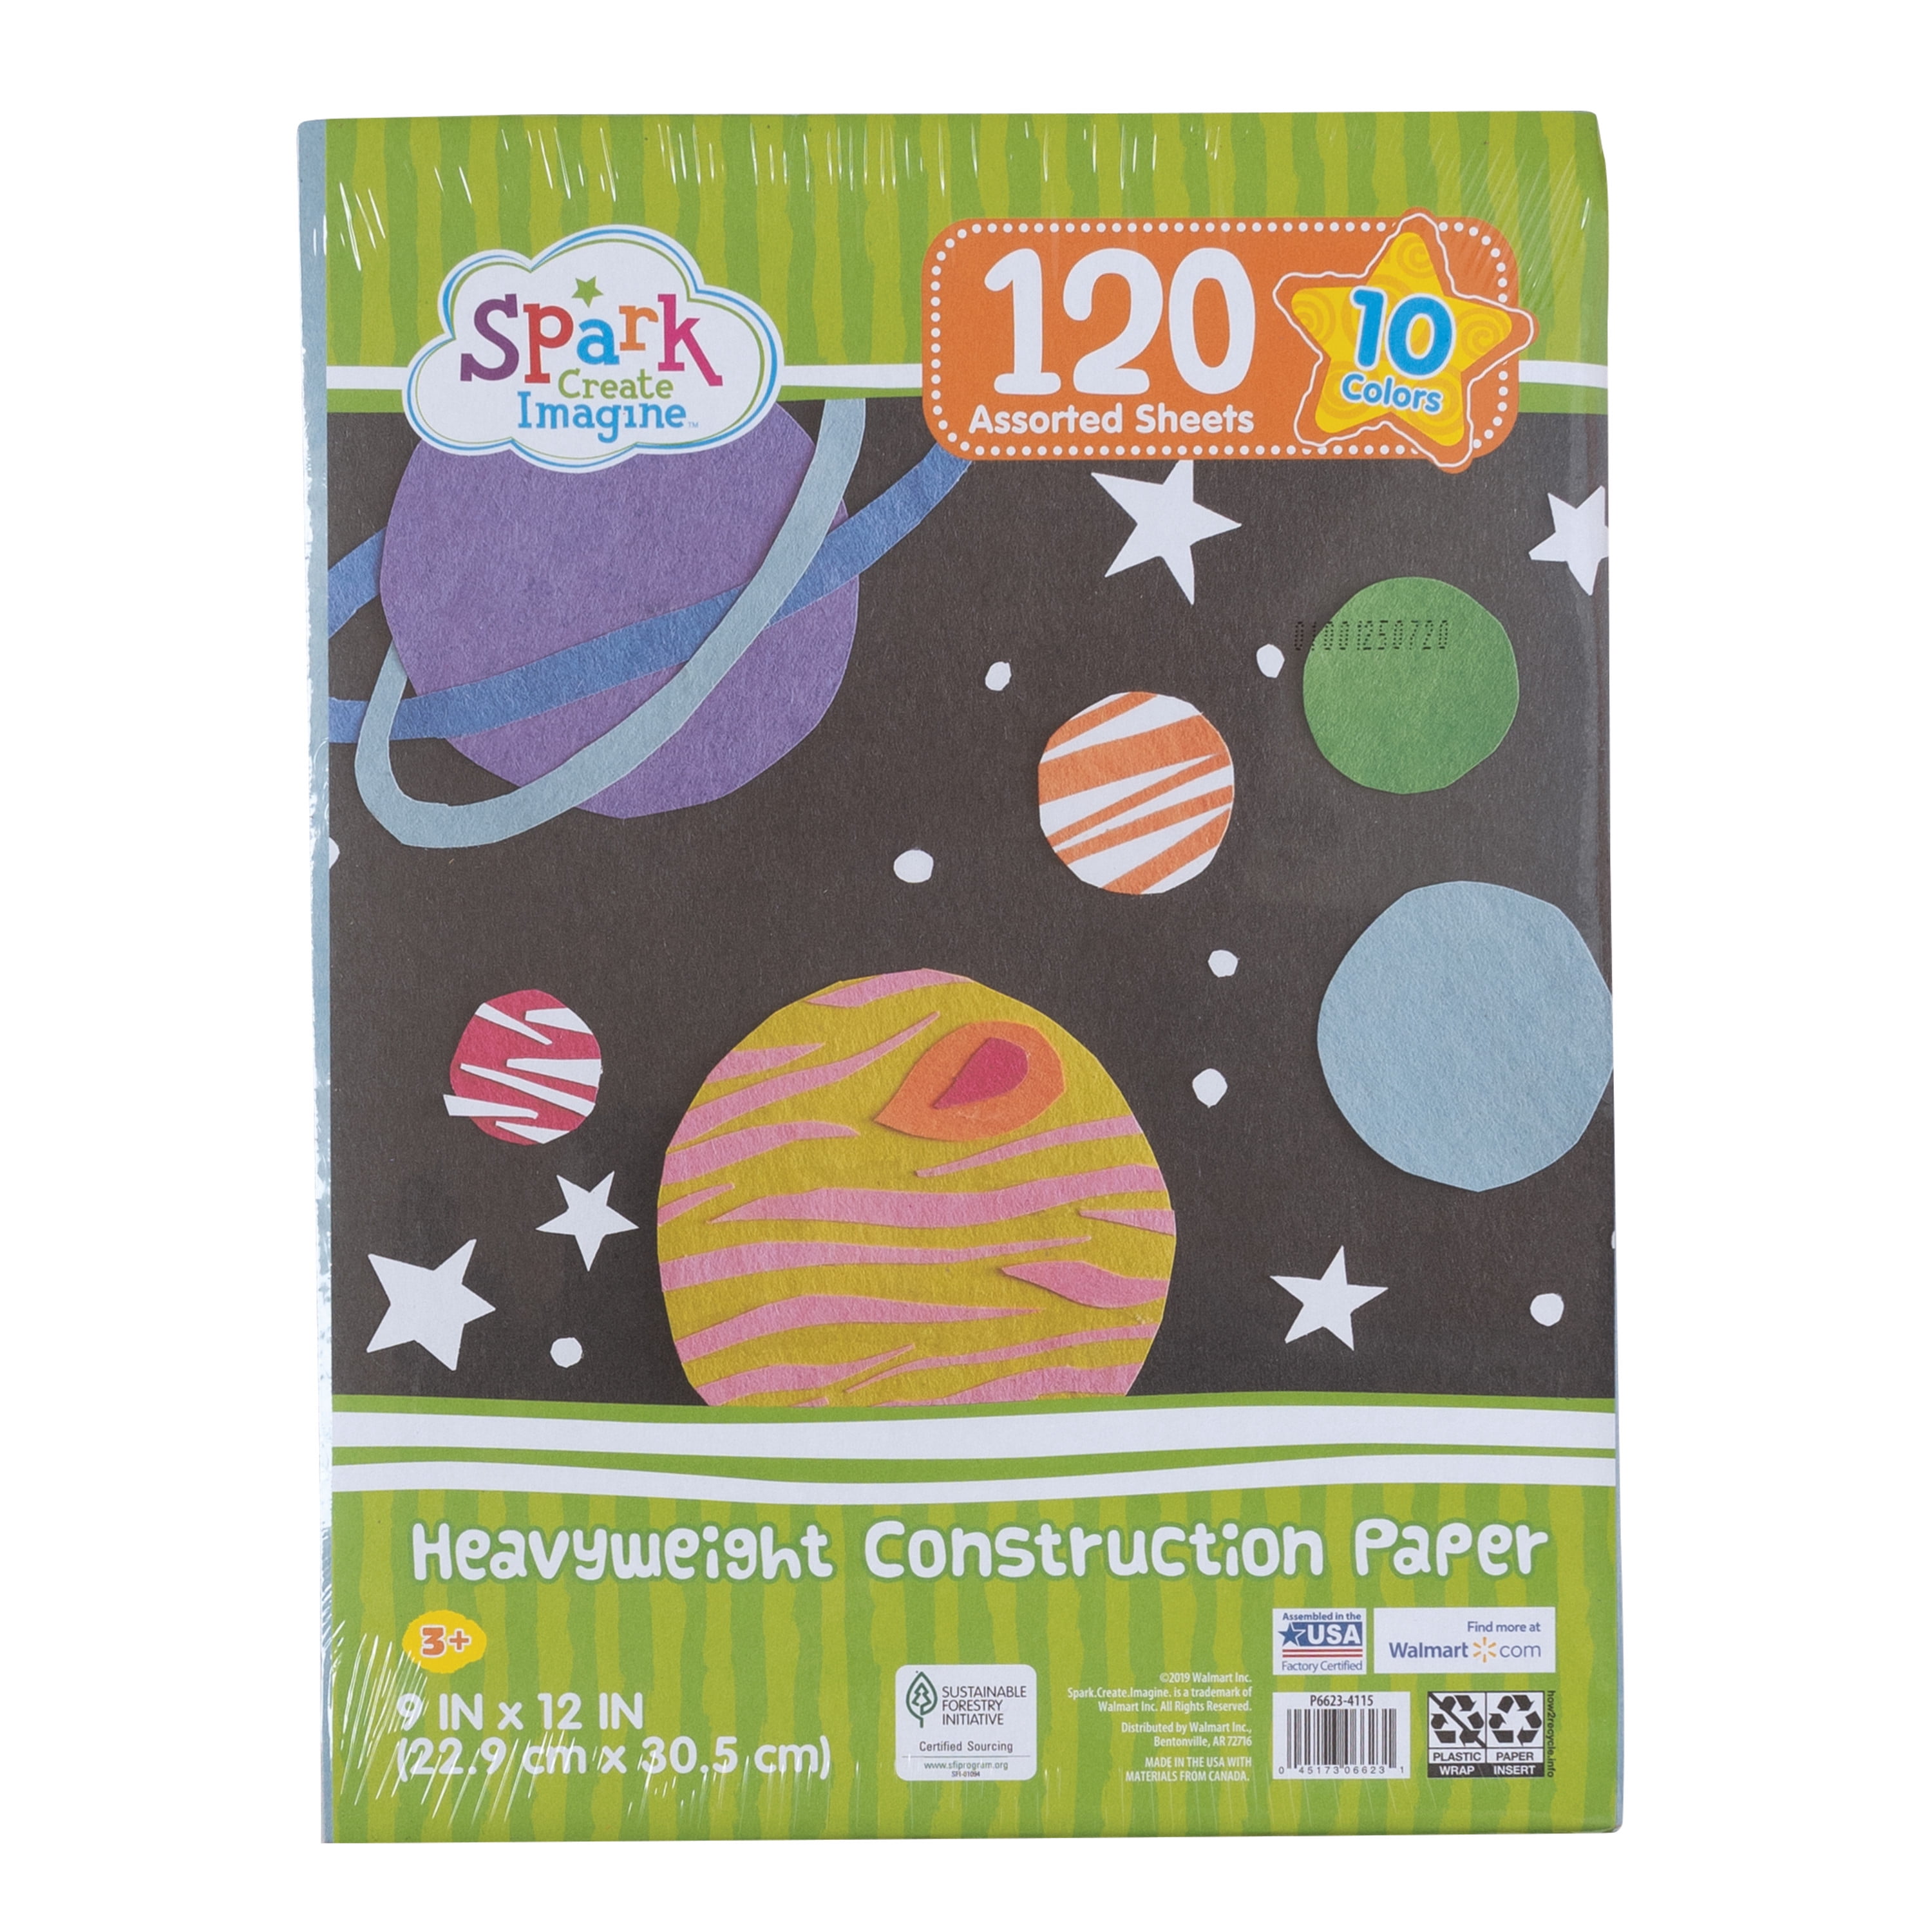 Spark Create Imagine 9 in x 12 in Construction Paper, Heavyweight, 10 Assorted Colors, 120 Sheets